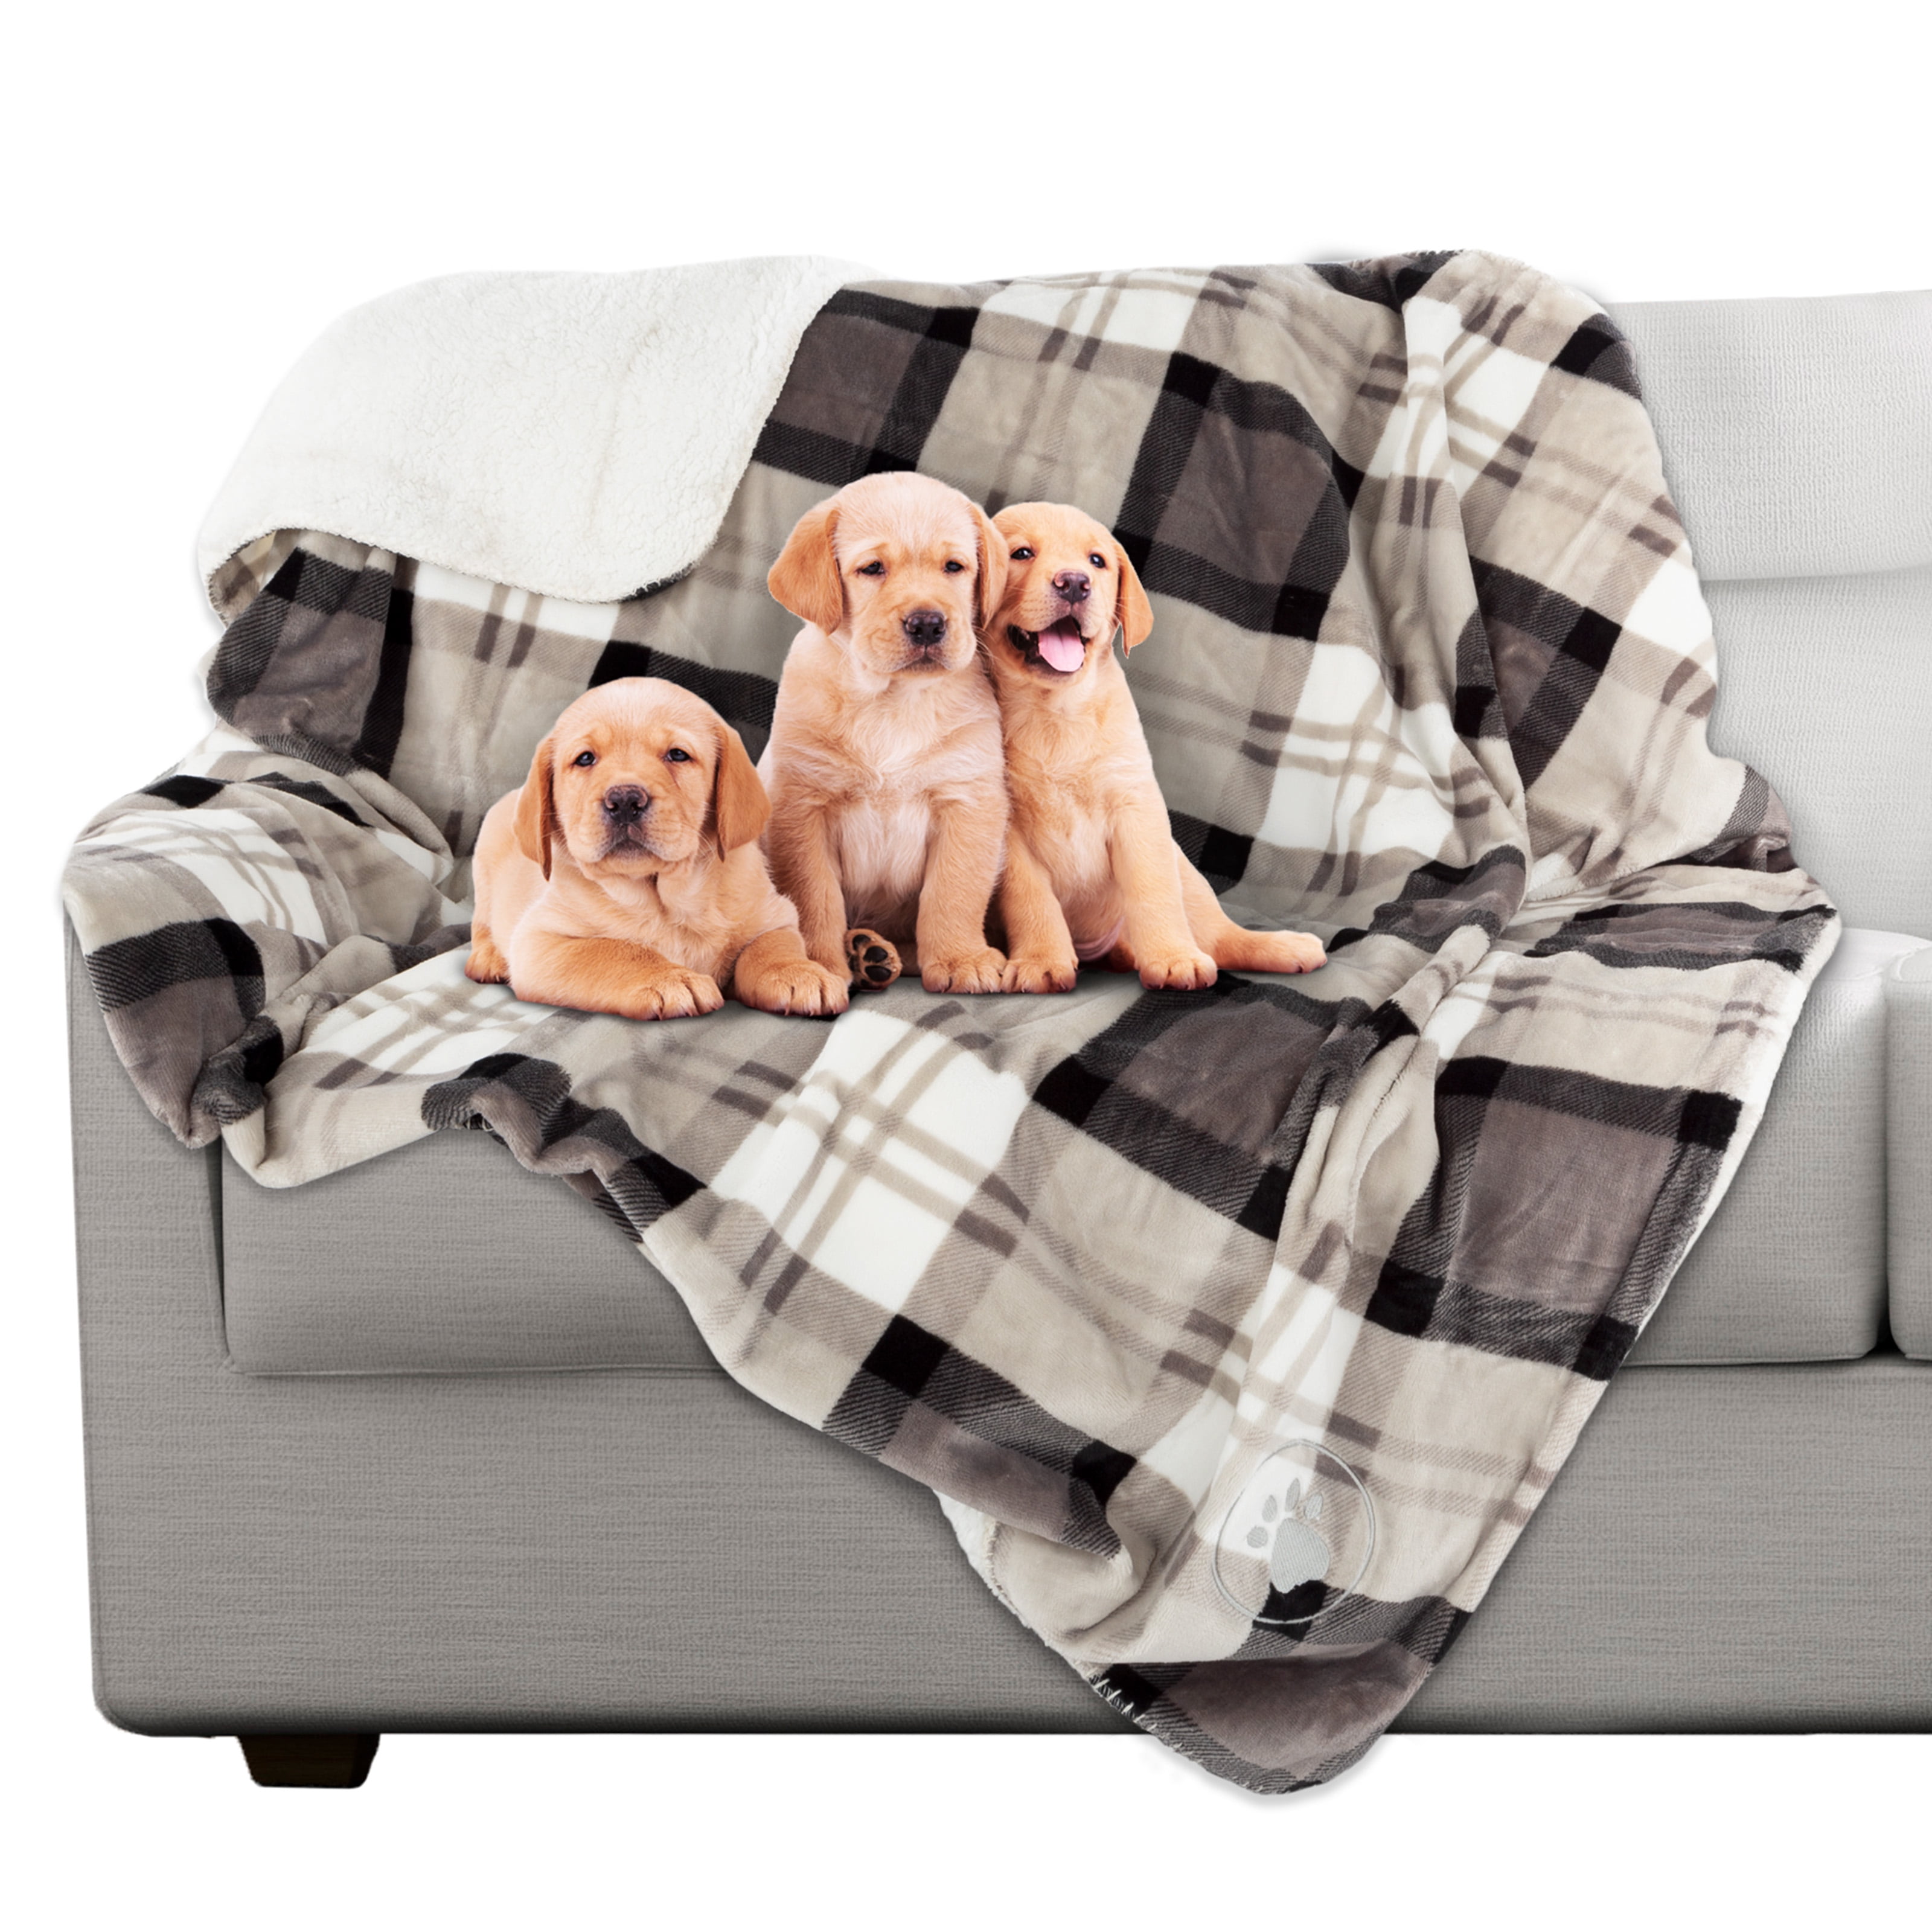 Bed from Spills 50x60 Stains Car or Fur – Dog and Cat Blankets by Petmaker Waterproof Pet Blanket – Reversible Cream Throw Protects Couch 